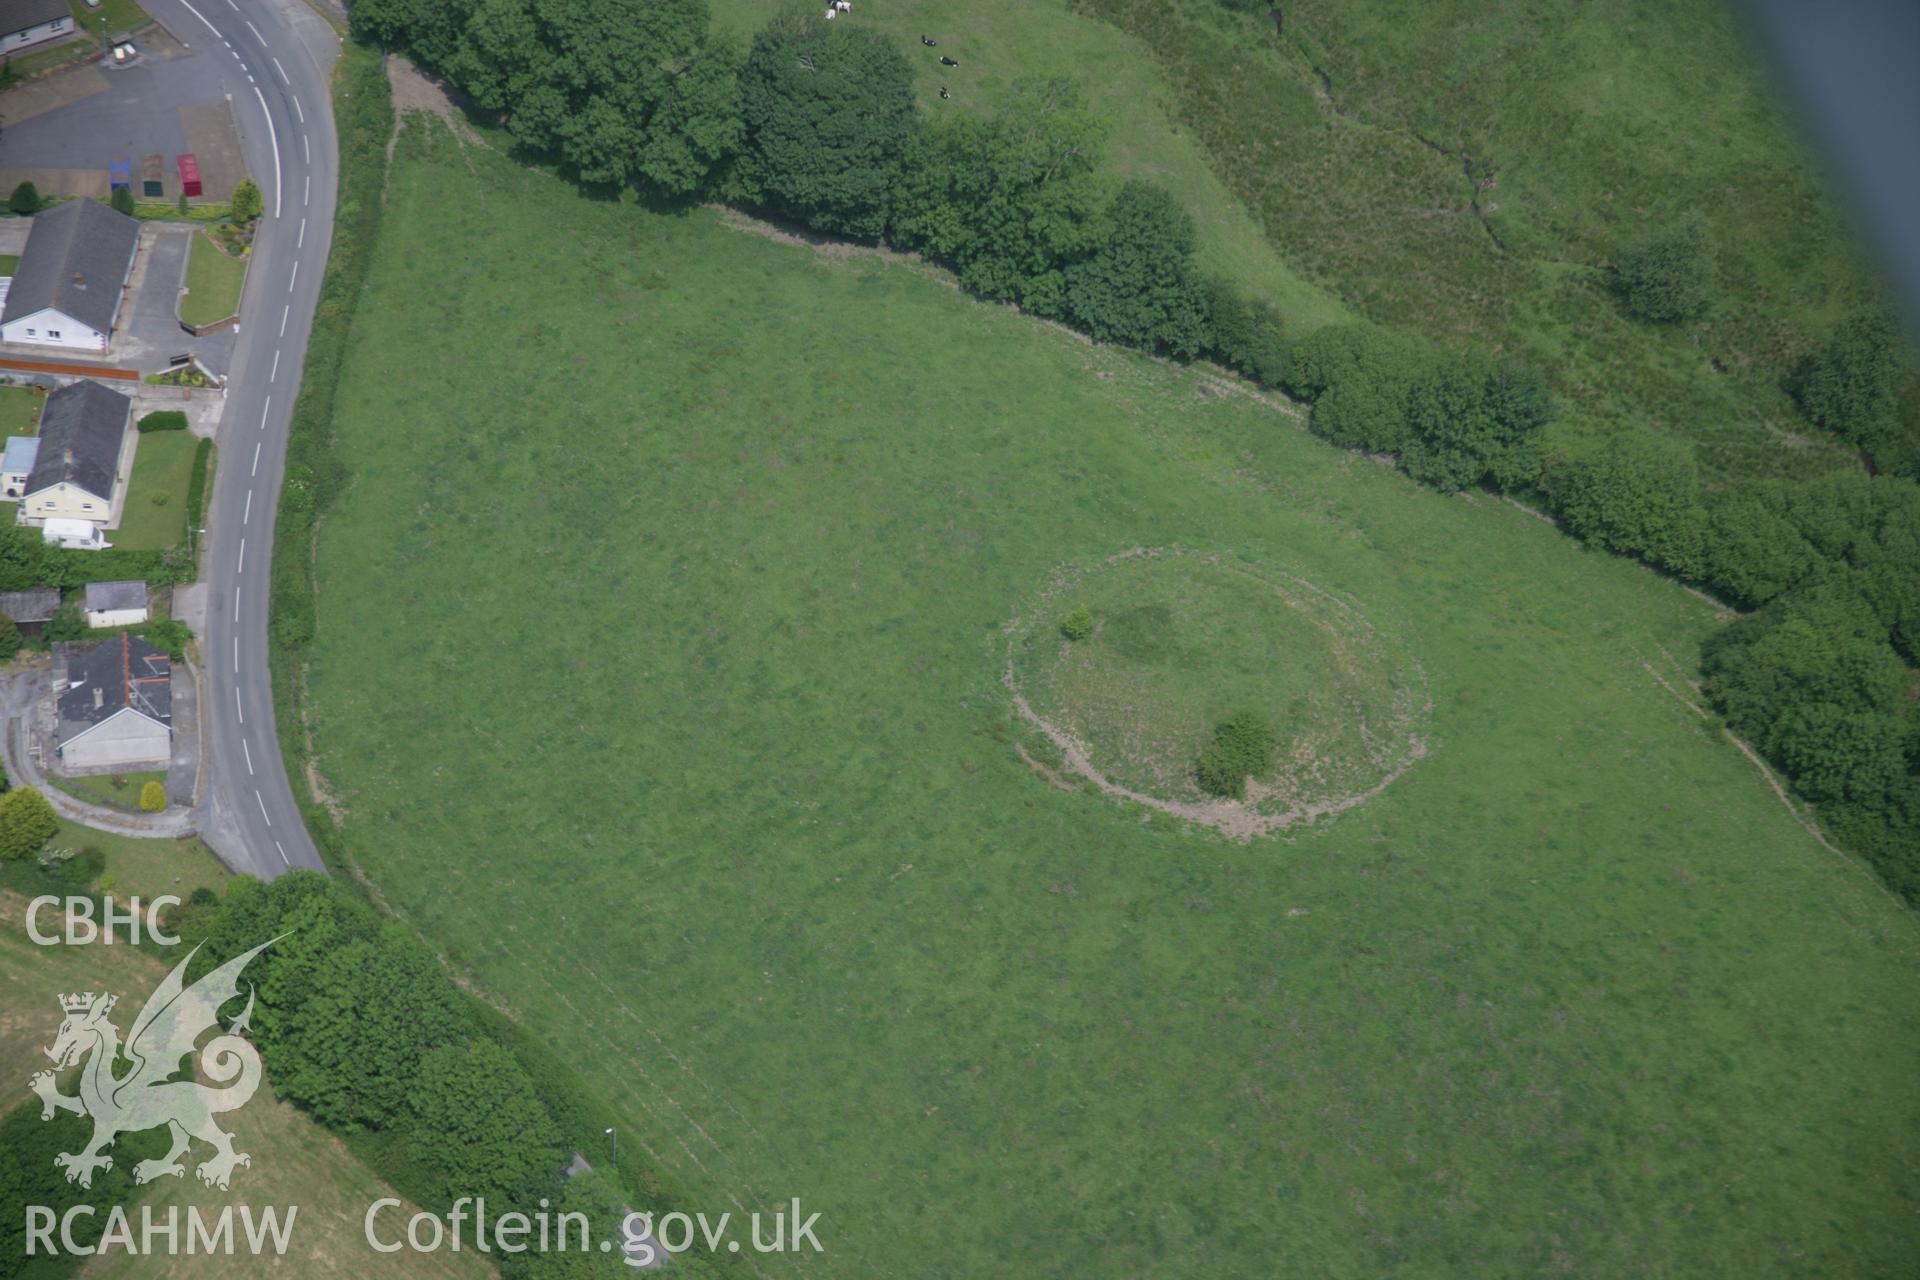 RCAHMW colour oblique aerial photograph of Castell Mawr, Llanboidyfrom the south-east. Taken on 15 June 2006 by Toby Driver.